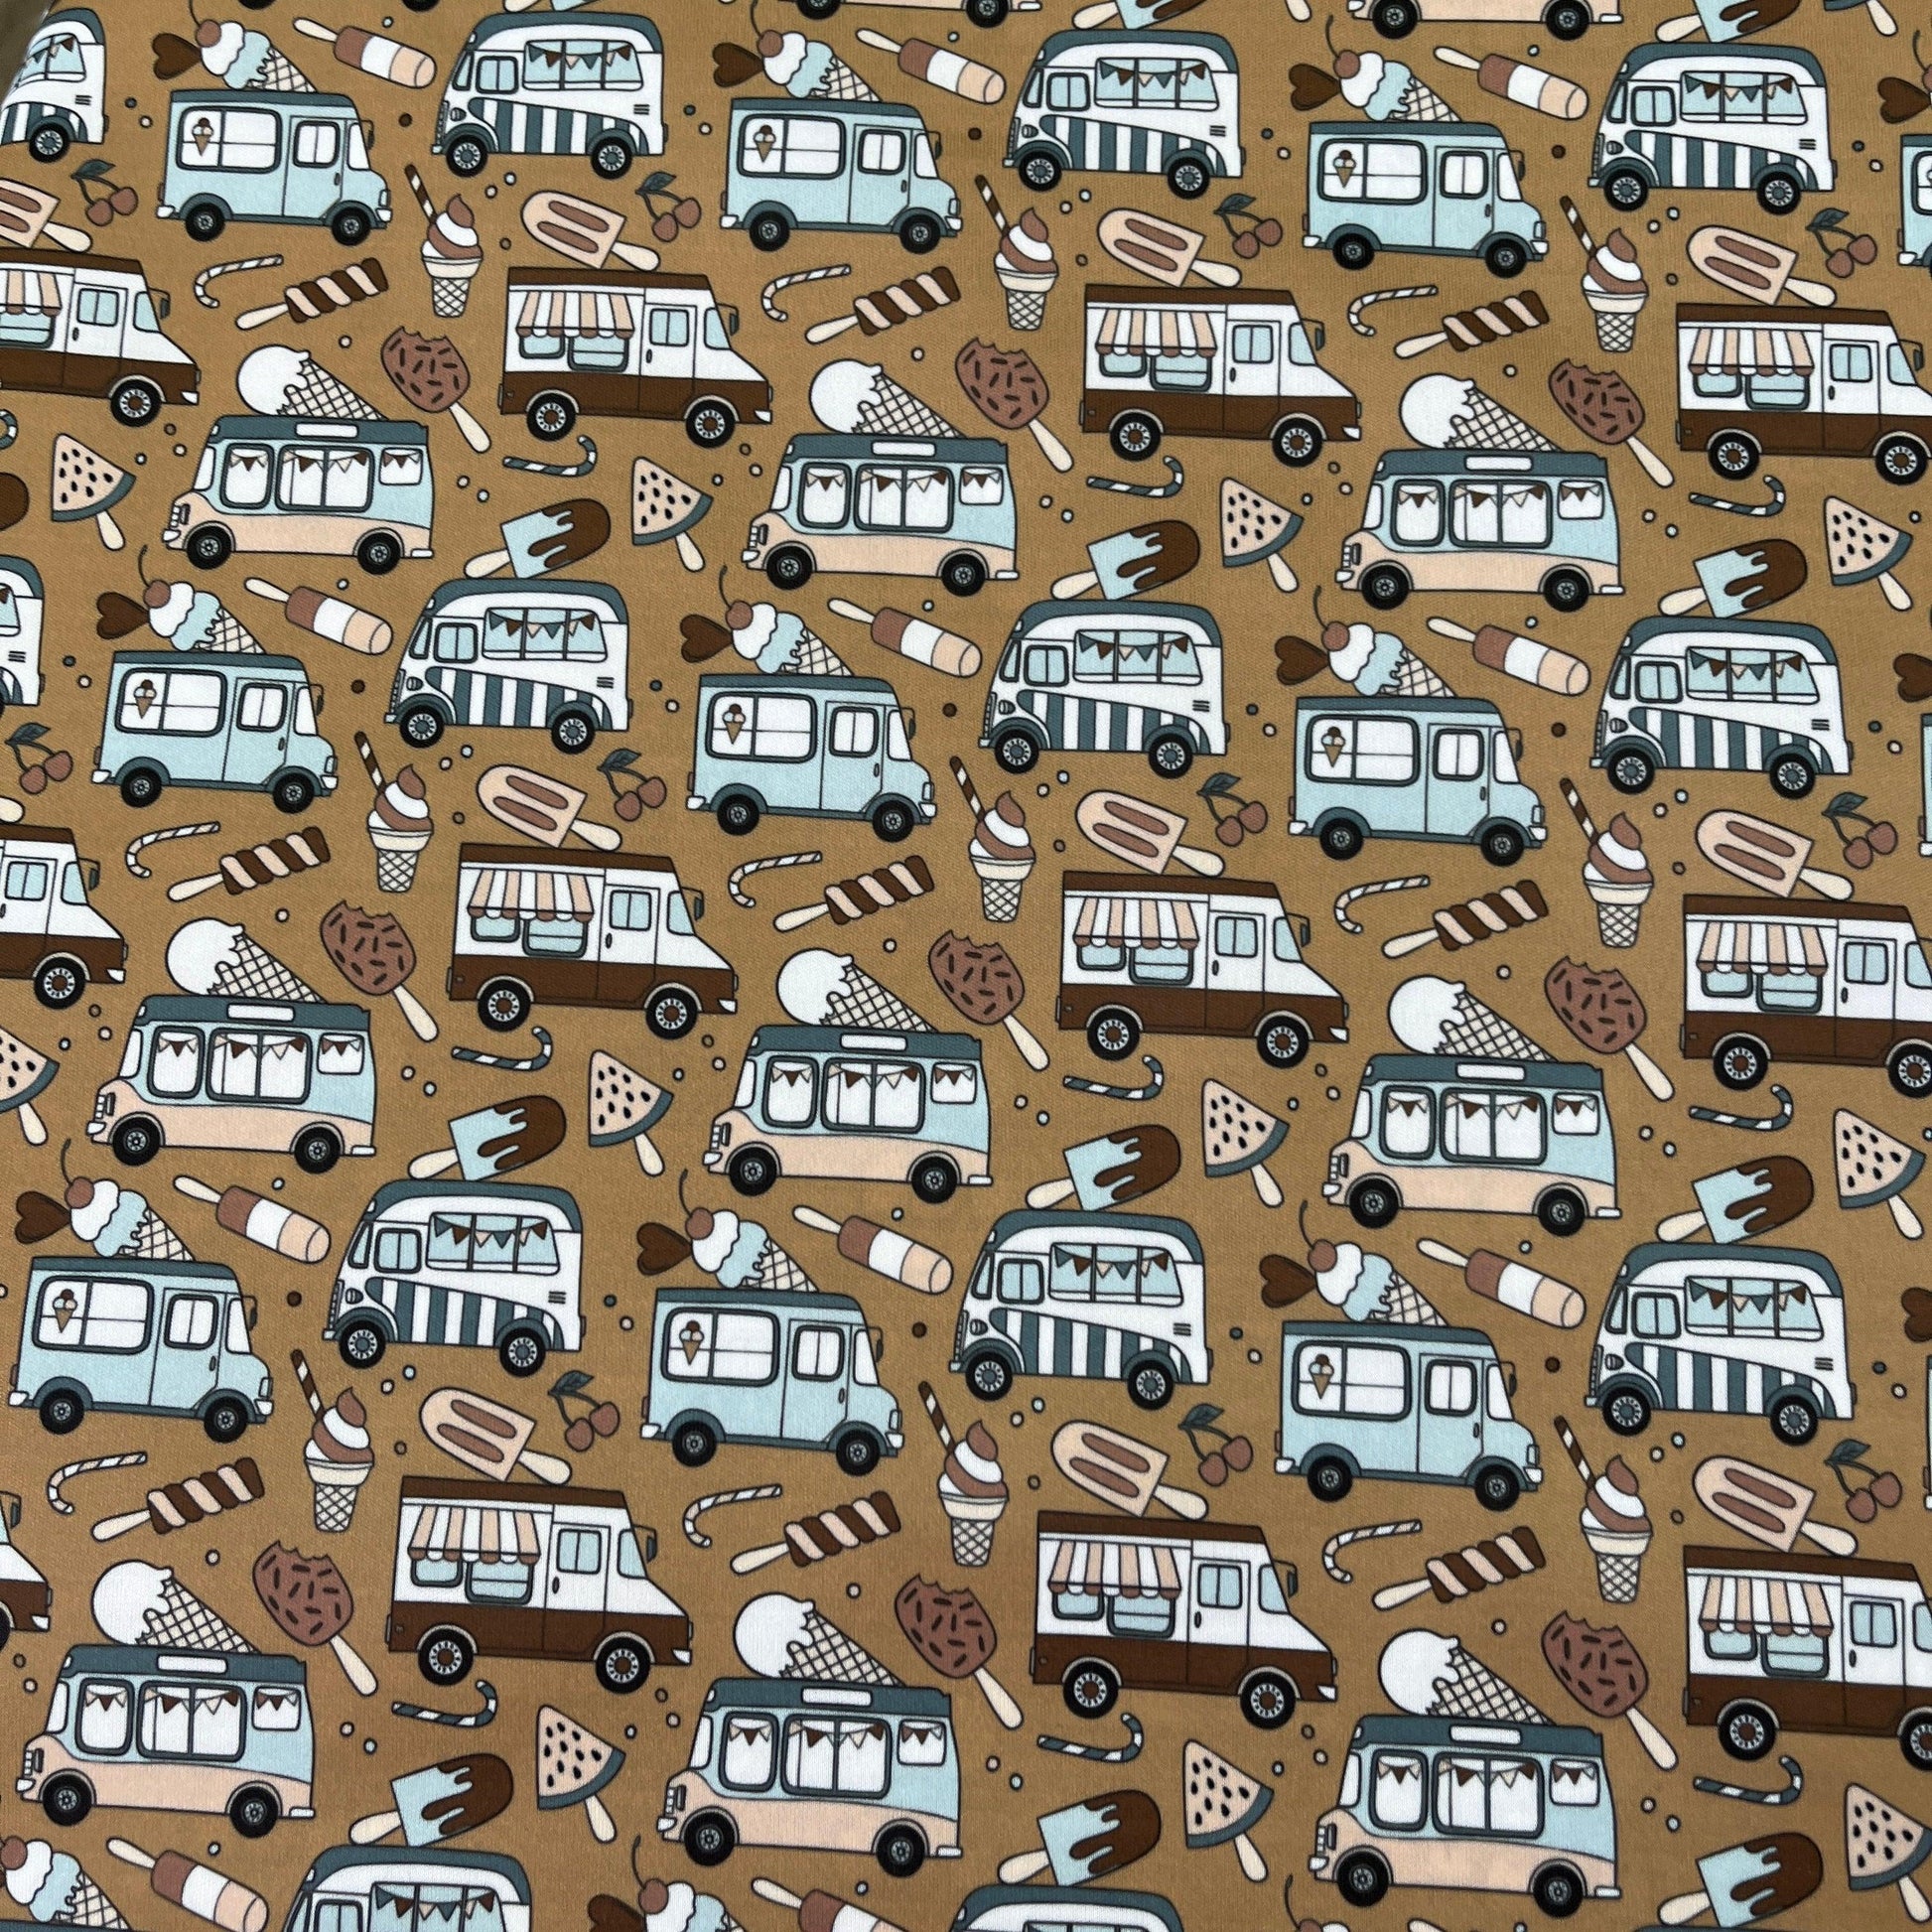 Ice Cream Trucks on Brown 1 mil PUL Fabric - Made in the USA - Nature's Fabrics